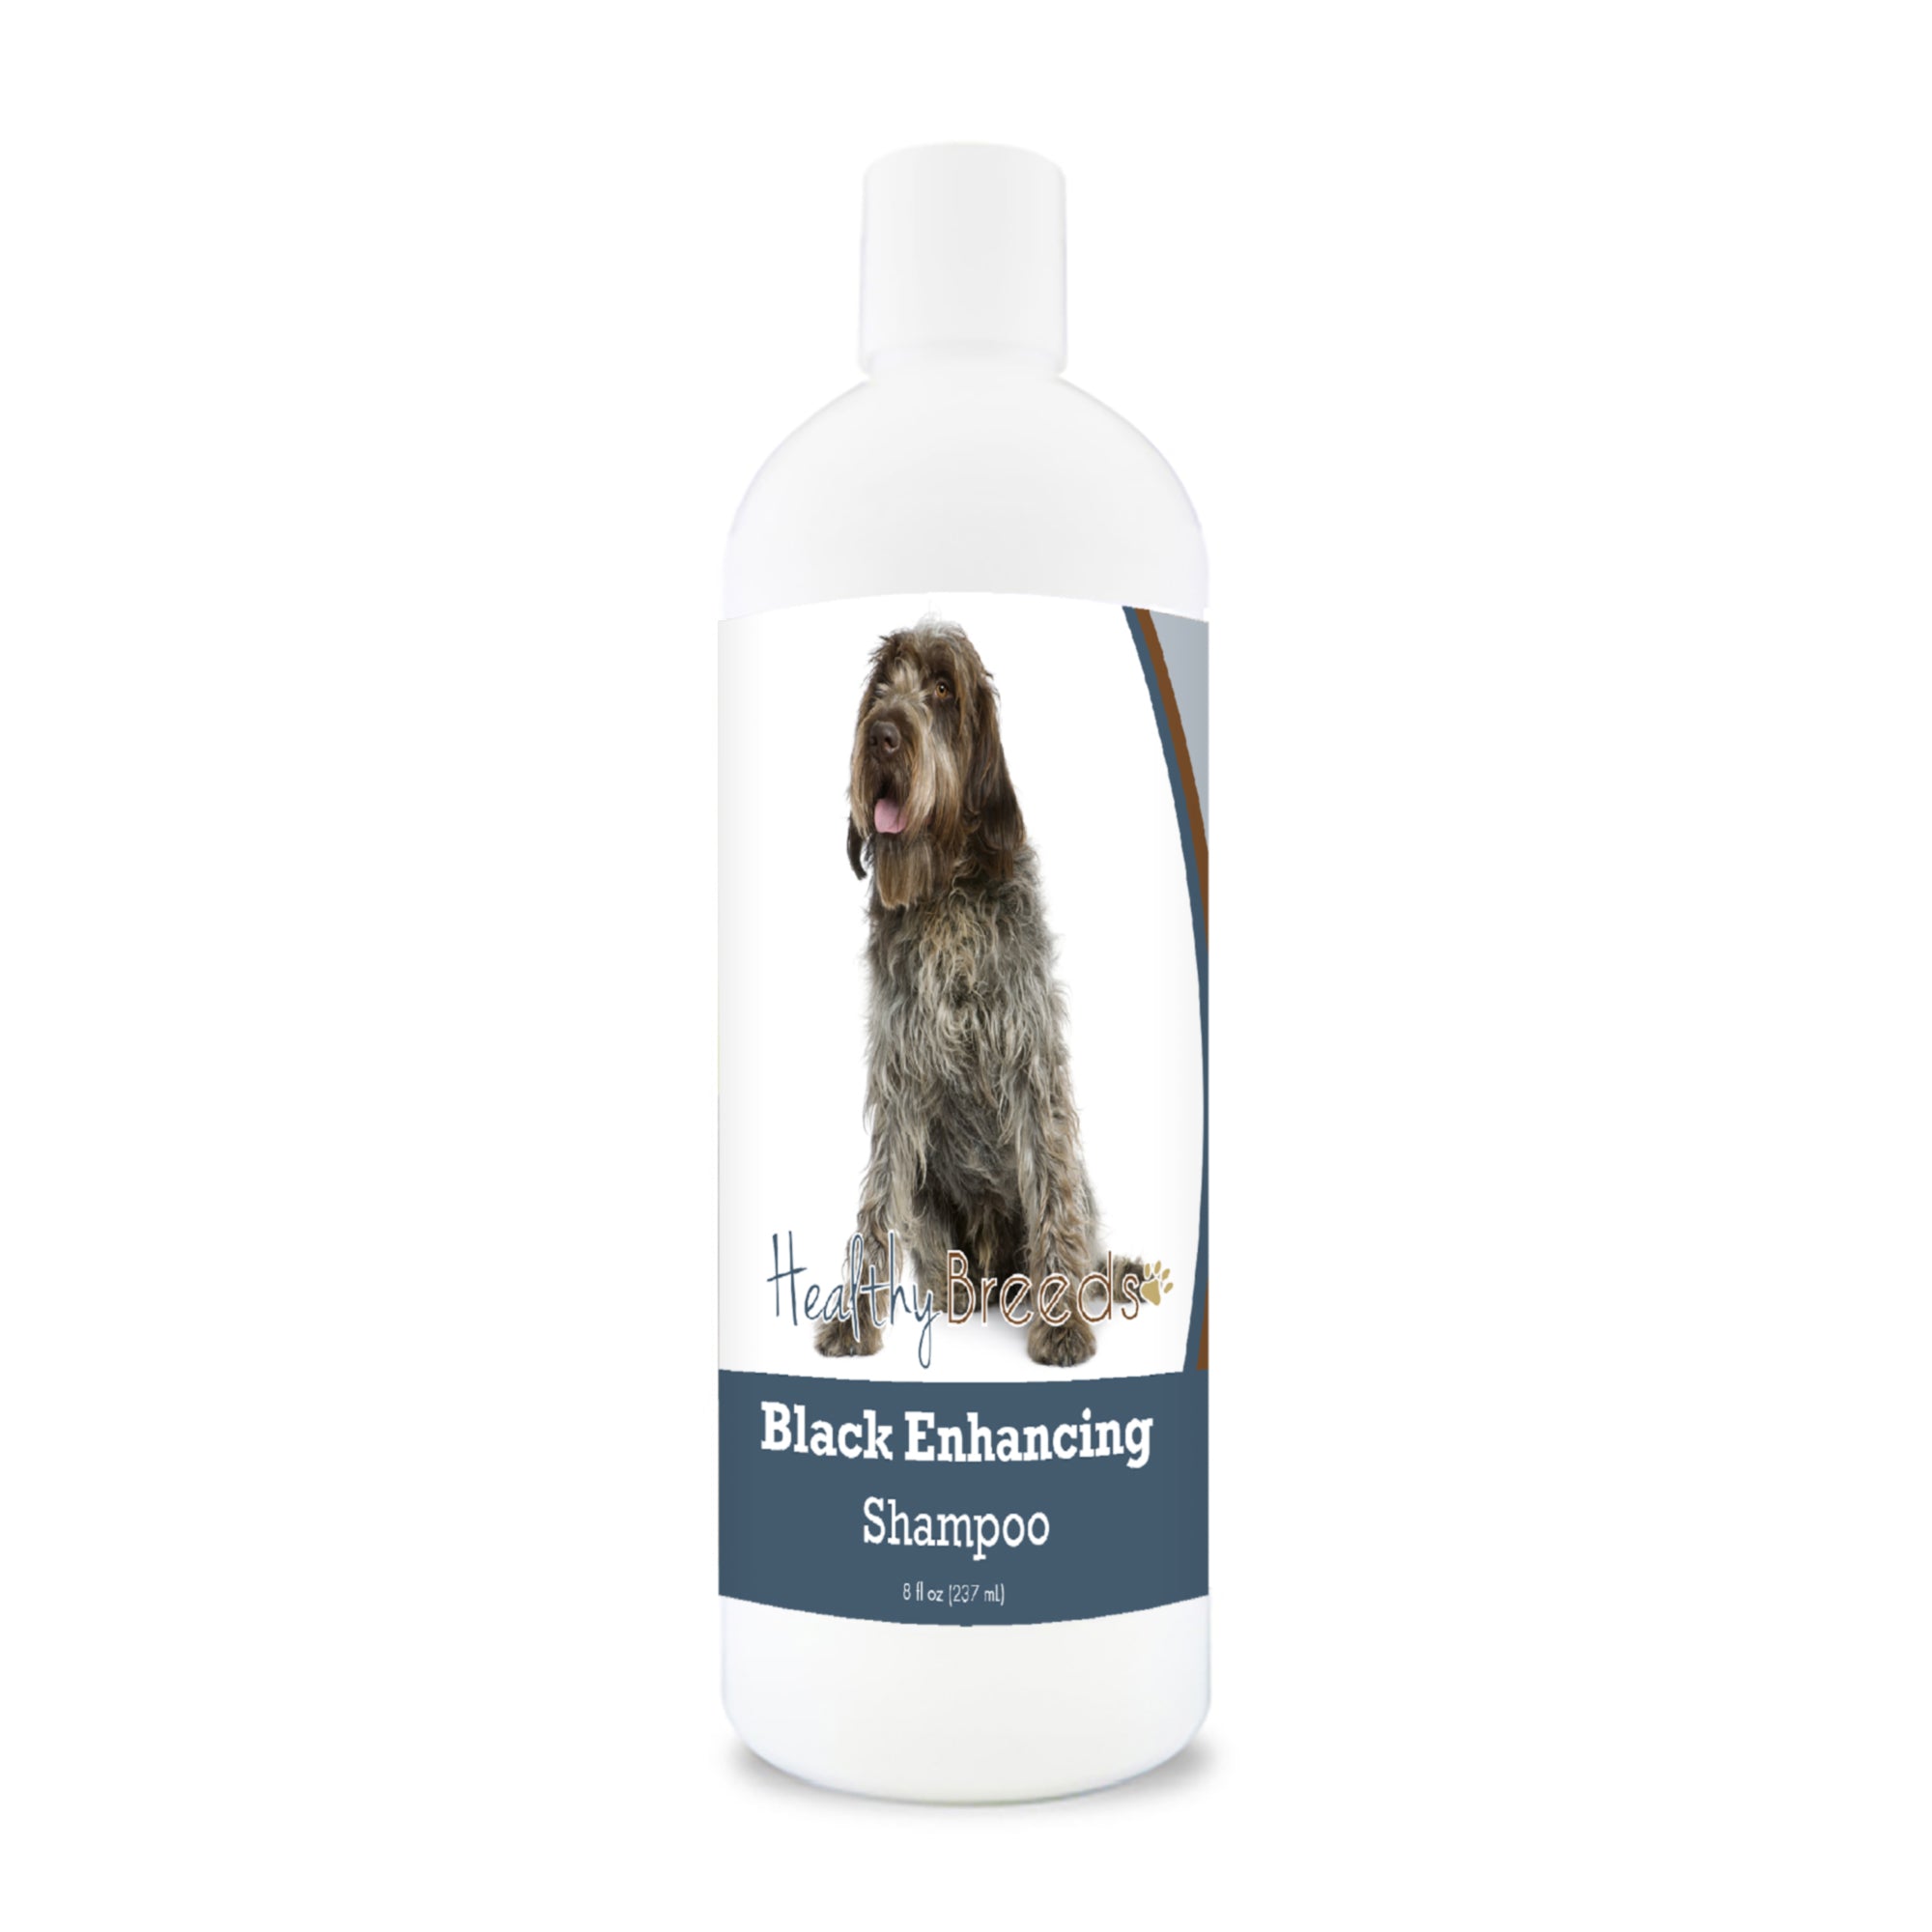 Wirehaired Pointing Griffon Black Enhancing Shampoo 8 oz